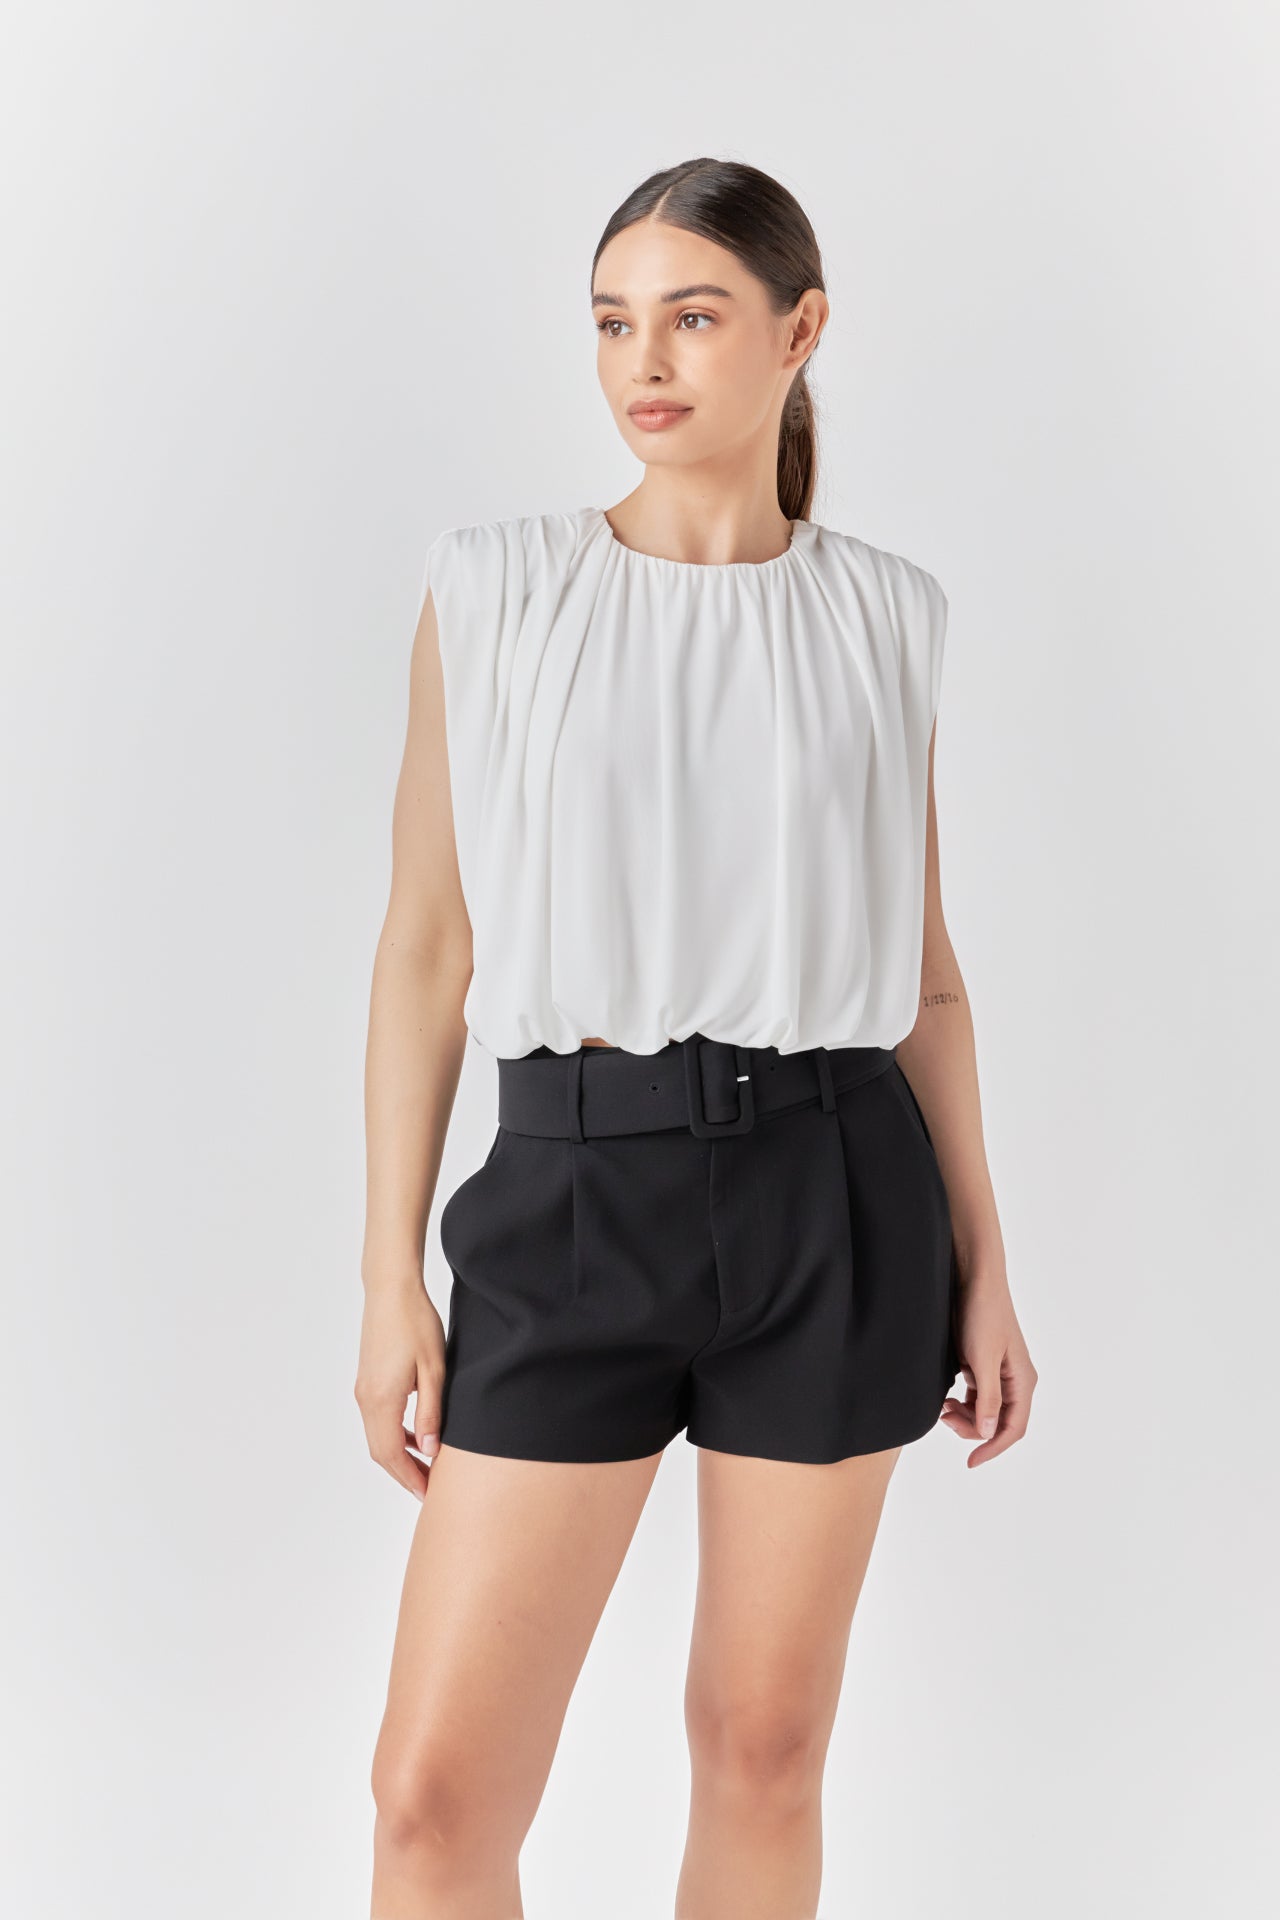 ENDLESS ROSE - Shirred Shoulder Cropped Top - TOPS available at Objectrare